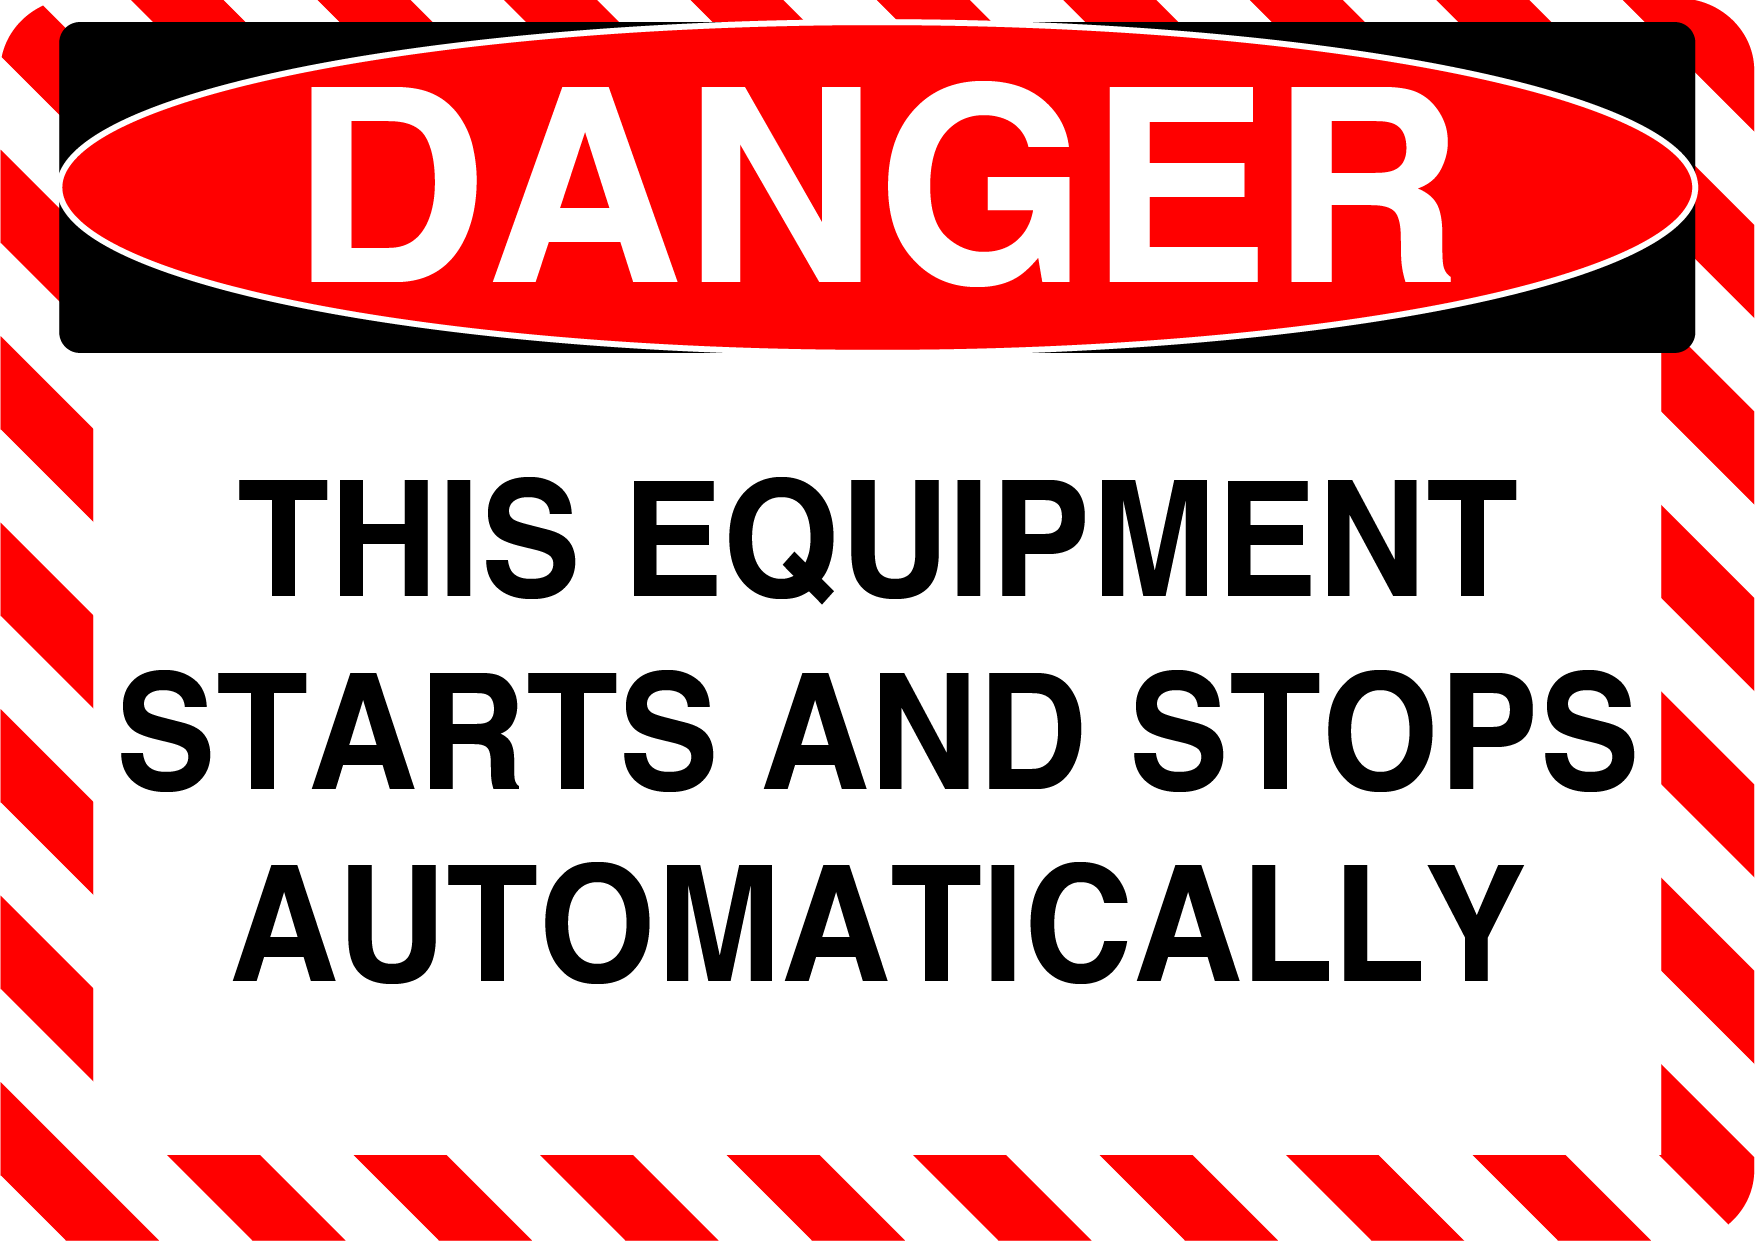 Danger "This Equipment Starts and Stops Automatically" Durable Matte Laminated Vinyl Floor Sign- Various Sizes Available